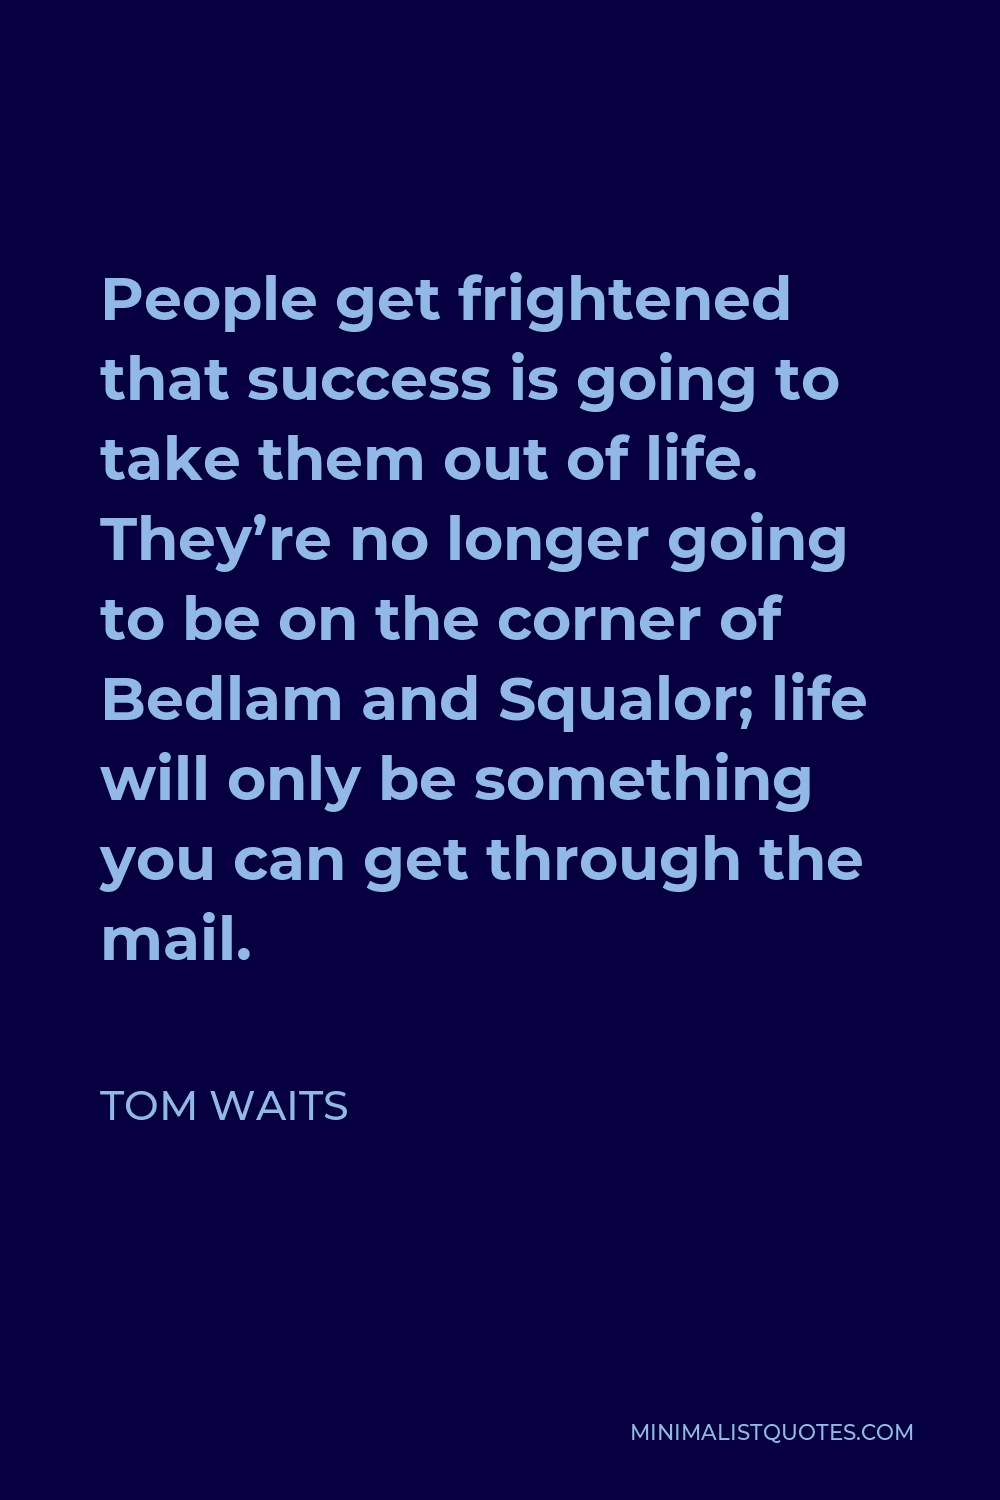 Tom Waits Quote - People get frightened that success is going to take them out of life. They’re no longer going to be on the corner of Bedlam and Squalor; life will only be something you can get through the mail.